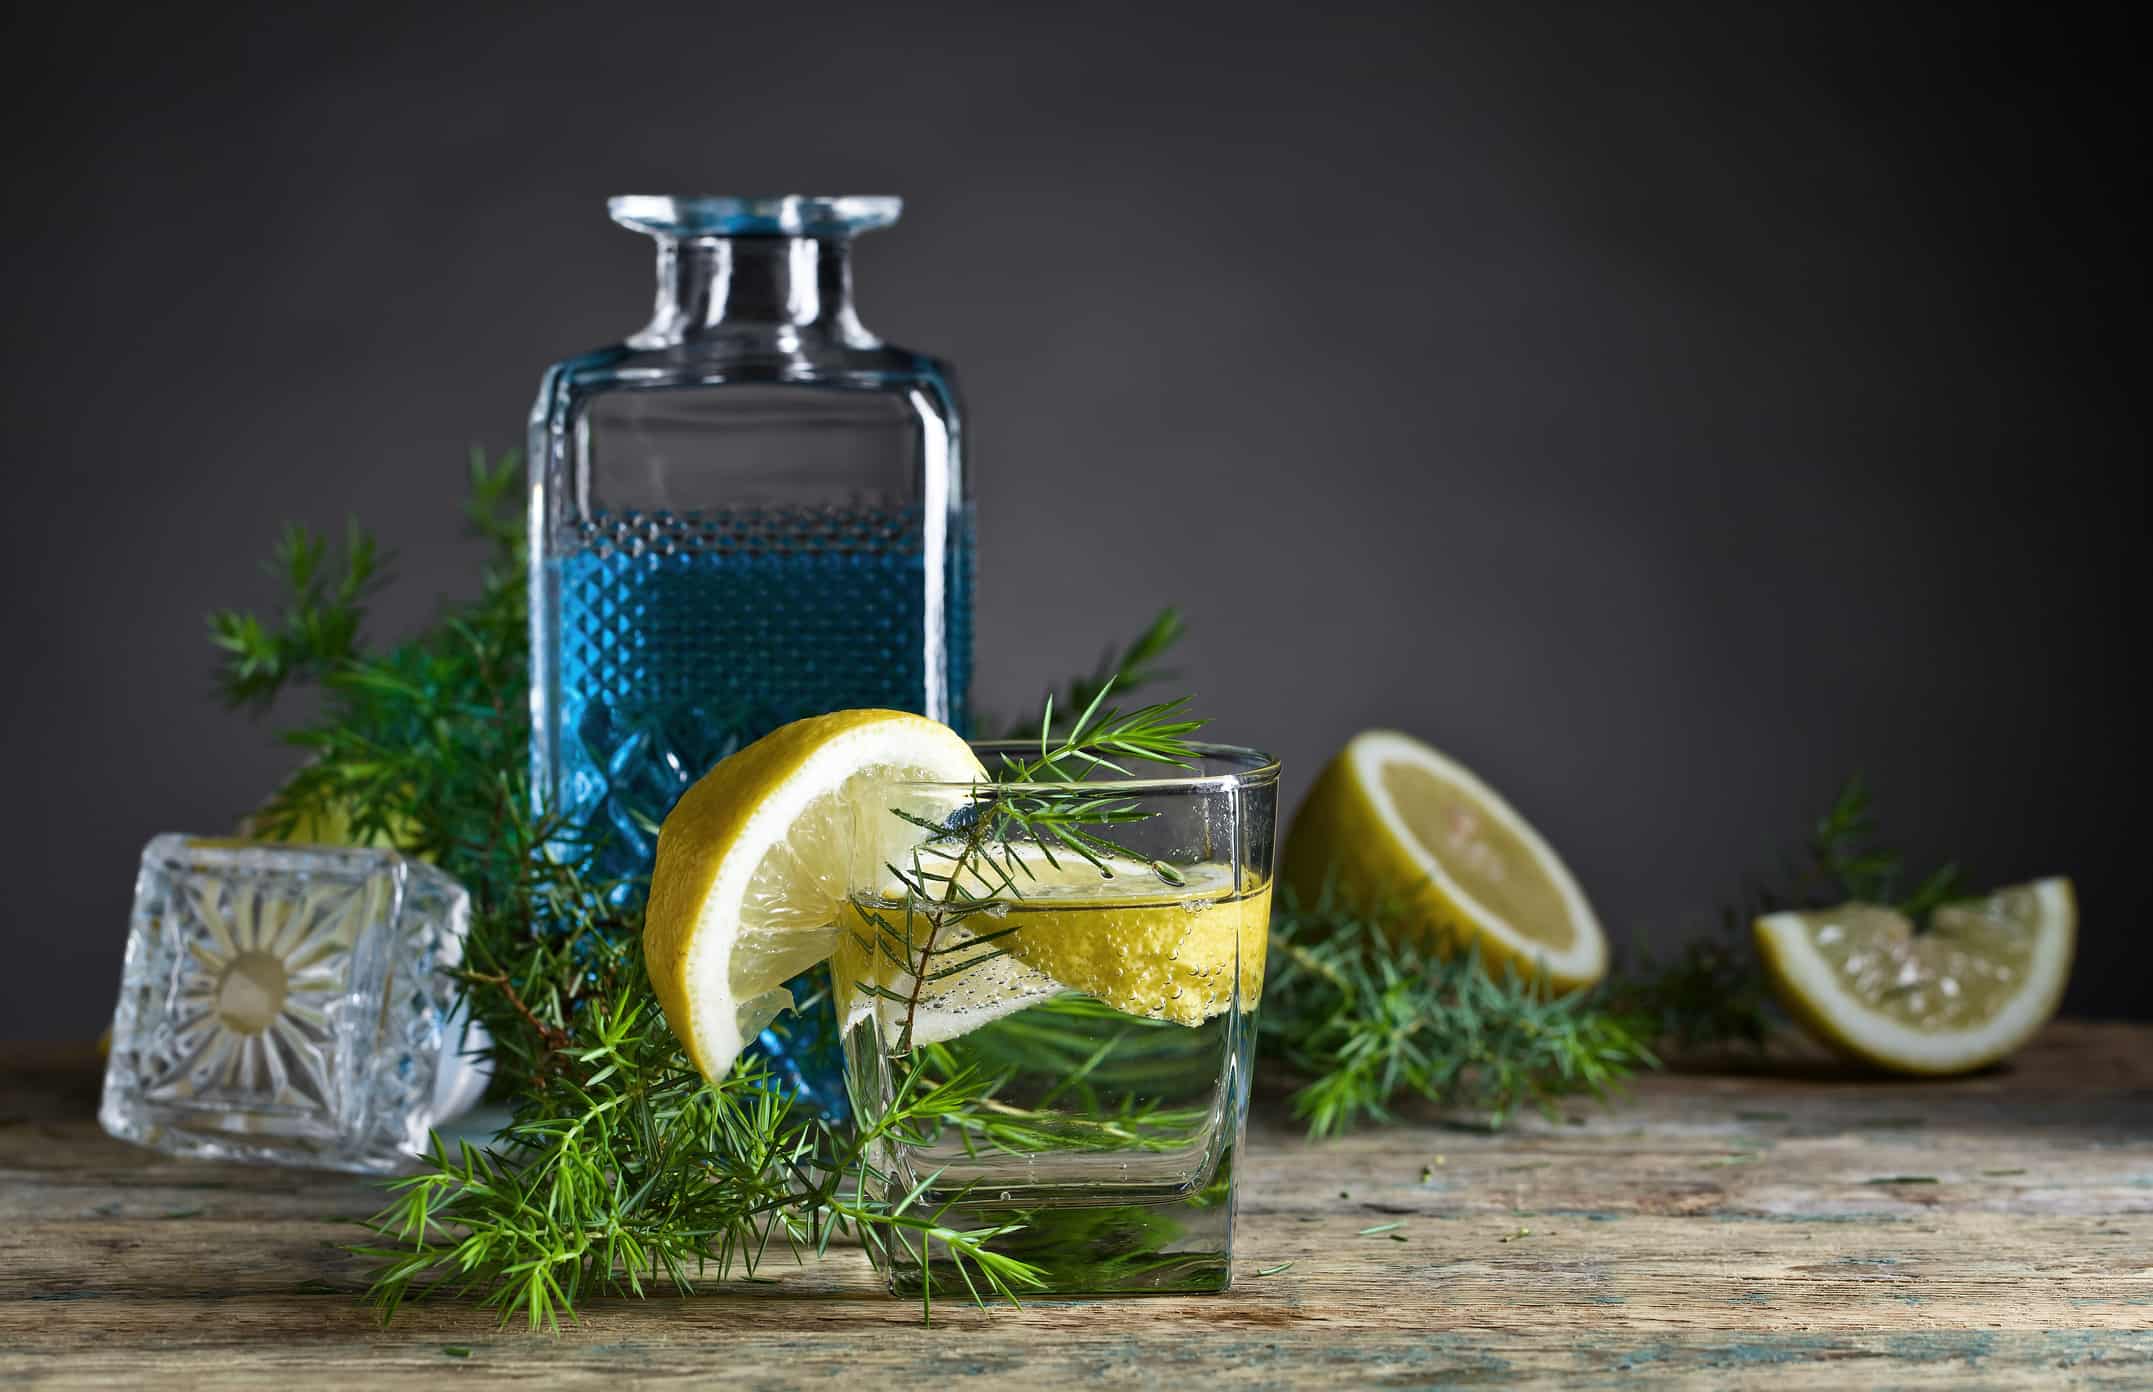 Corby Spirit and Wine stock has risen with the popularity of gin in Canada.